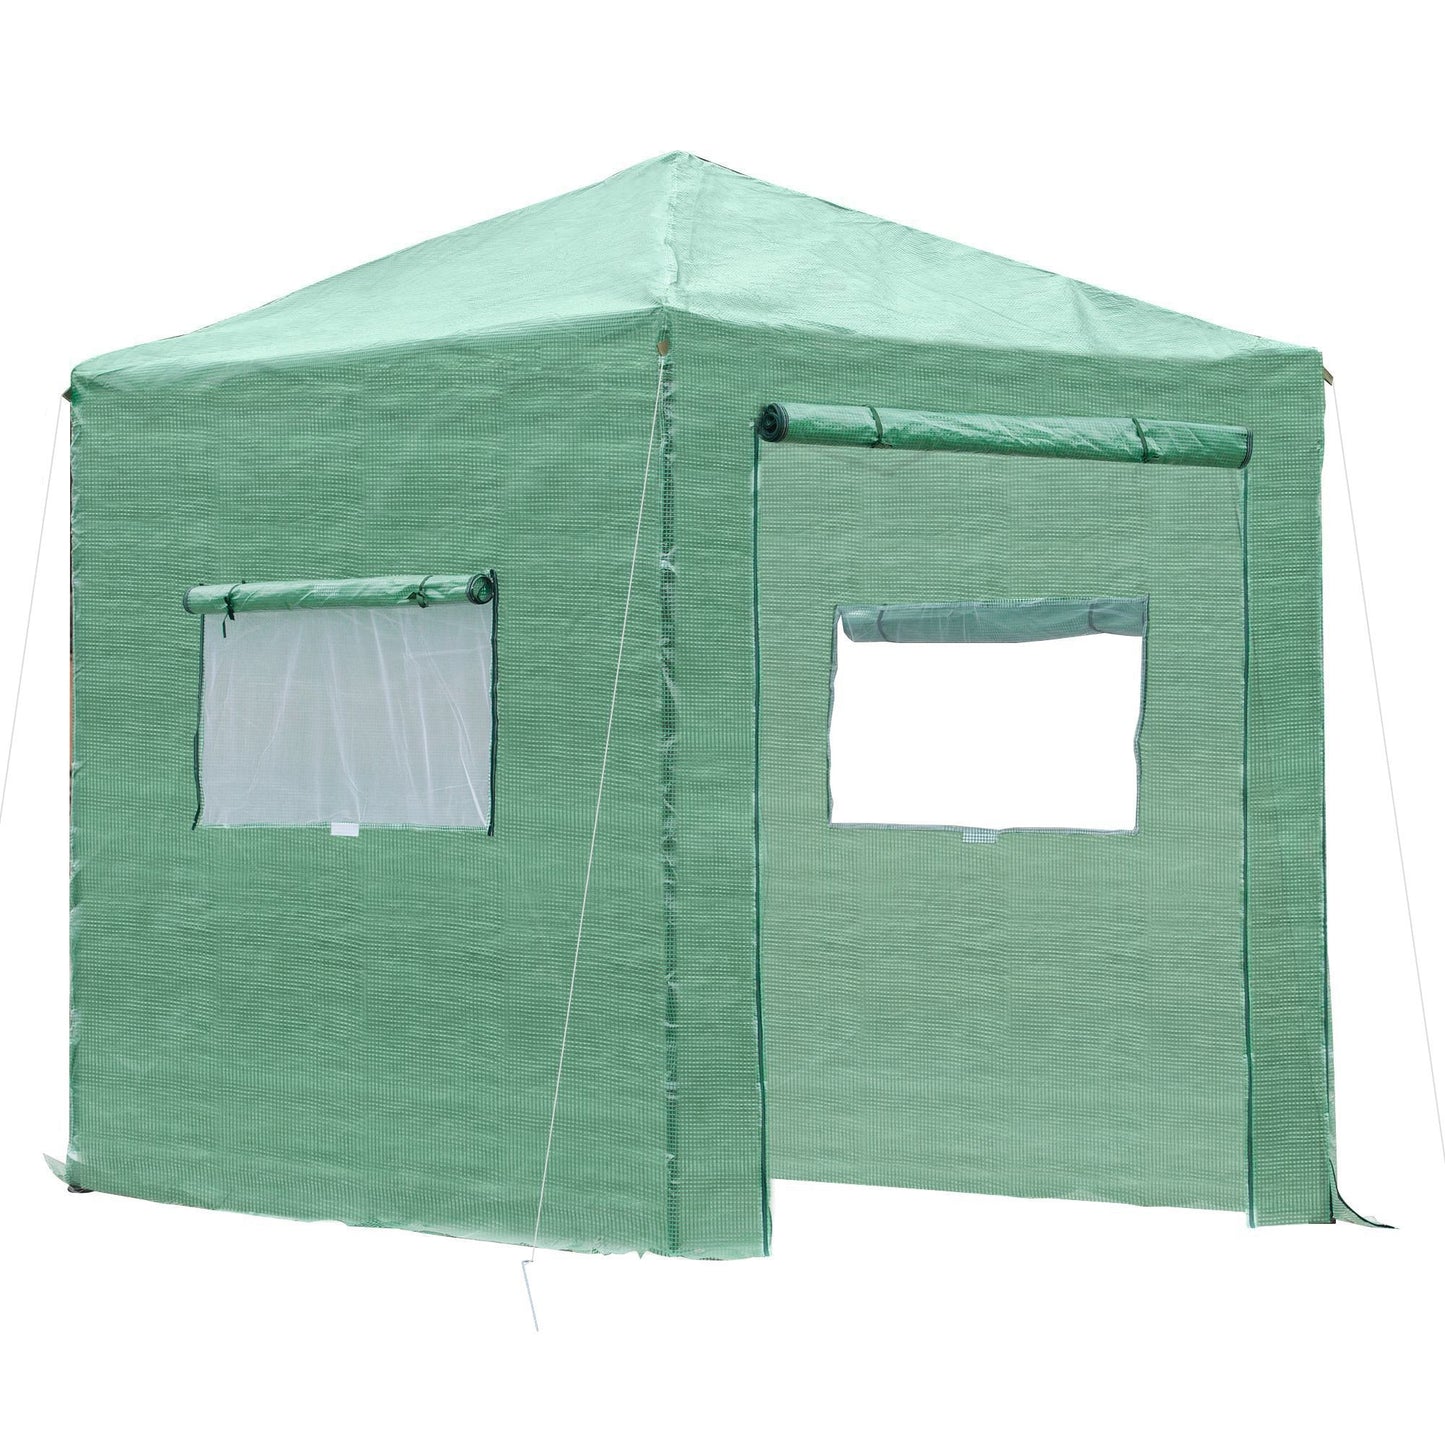 Outsunny Portable Walk in Greenhouse with Roll-up Door Windows Outdoor Foldable 2 x 2 x 2m